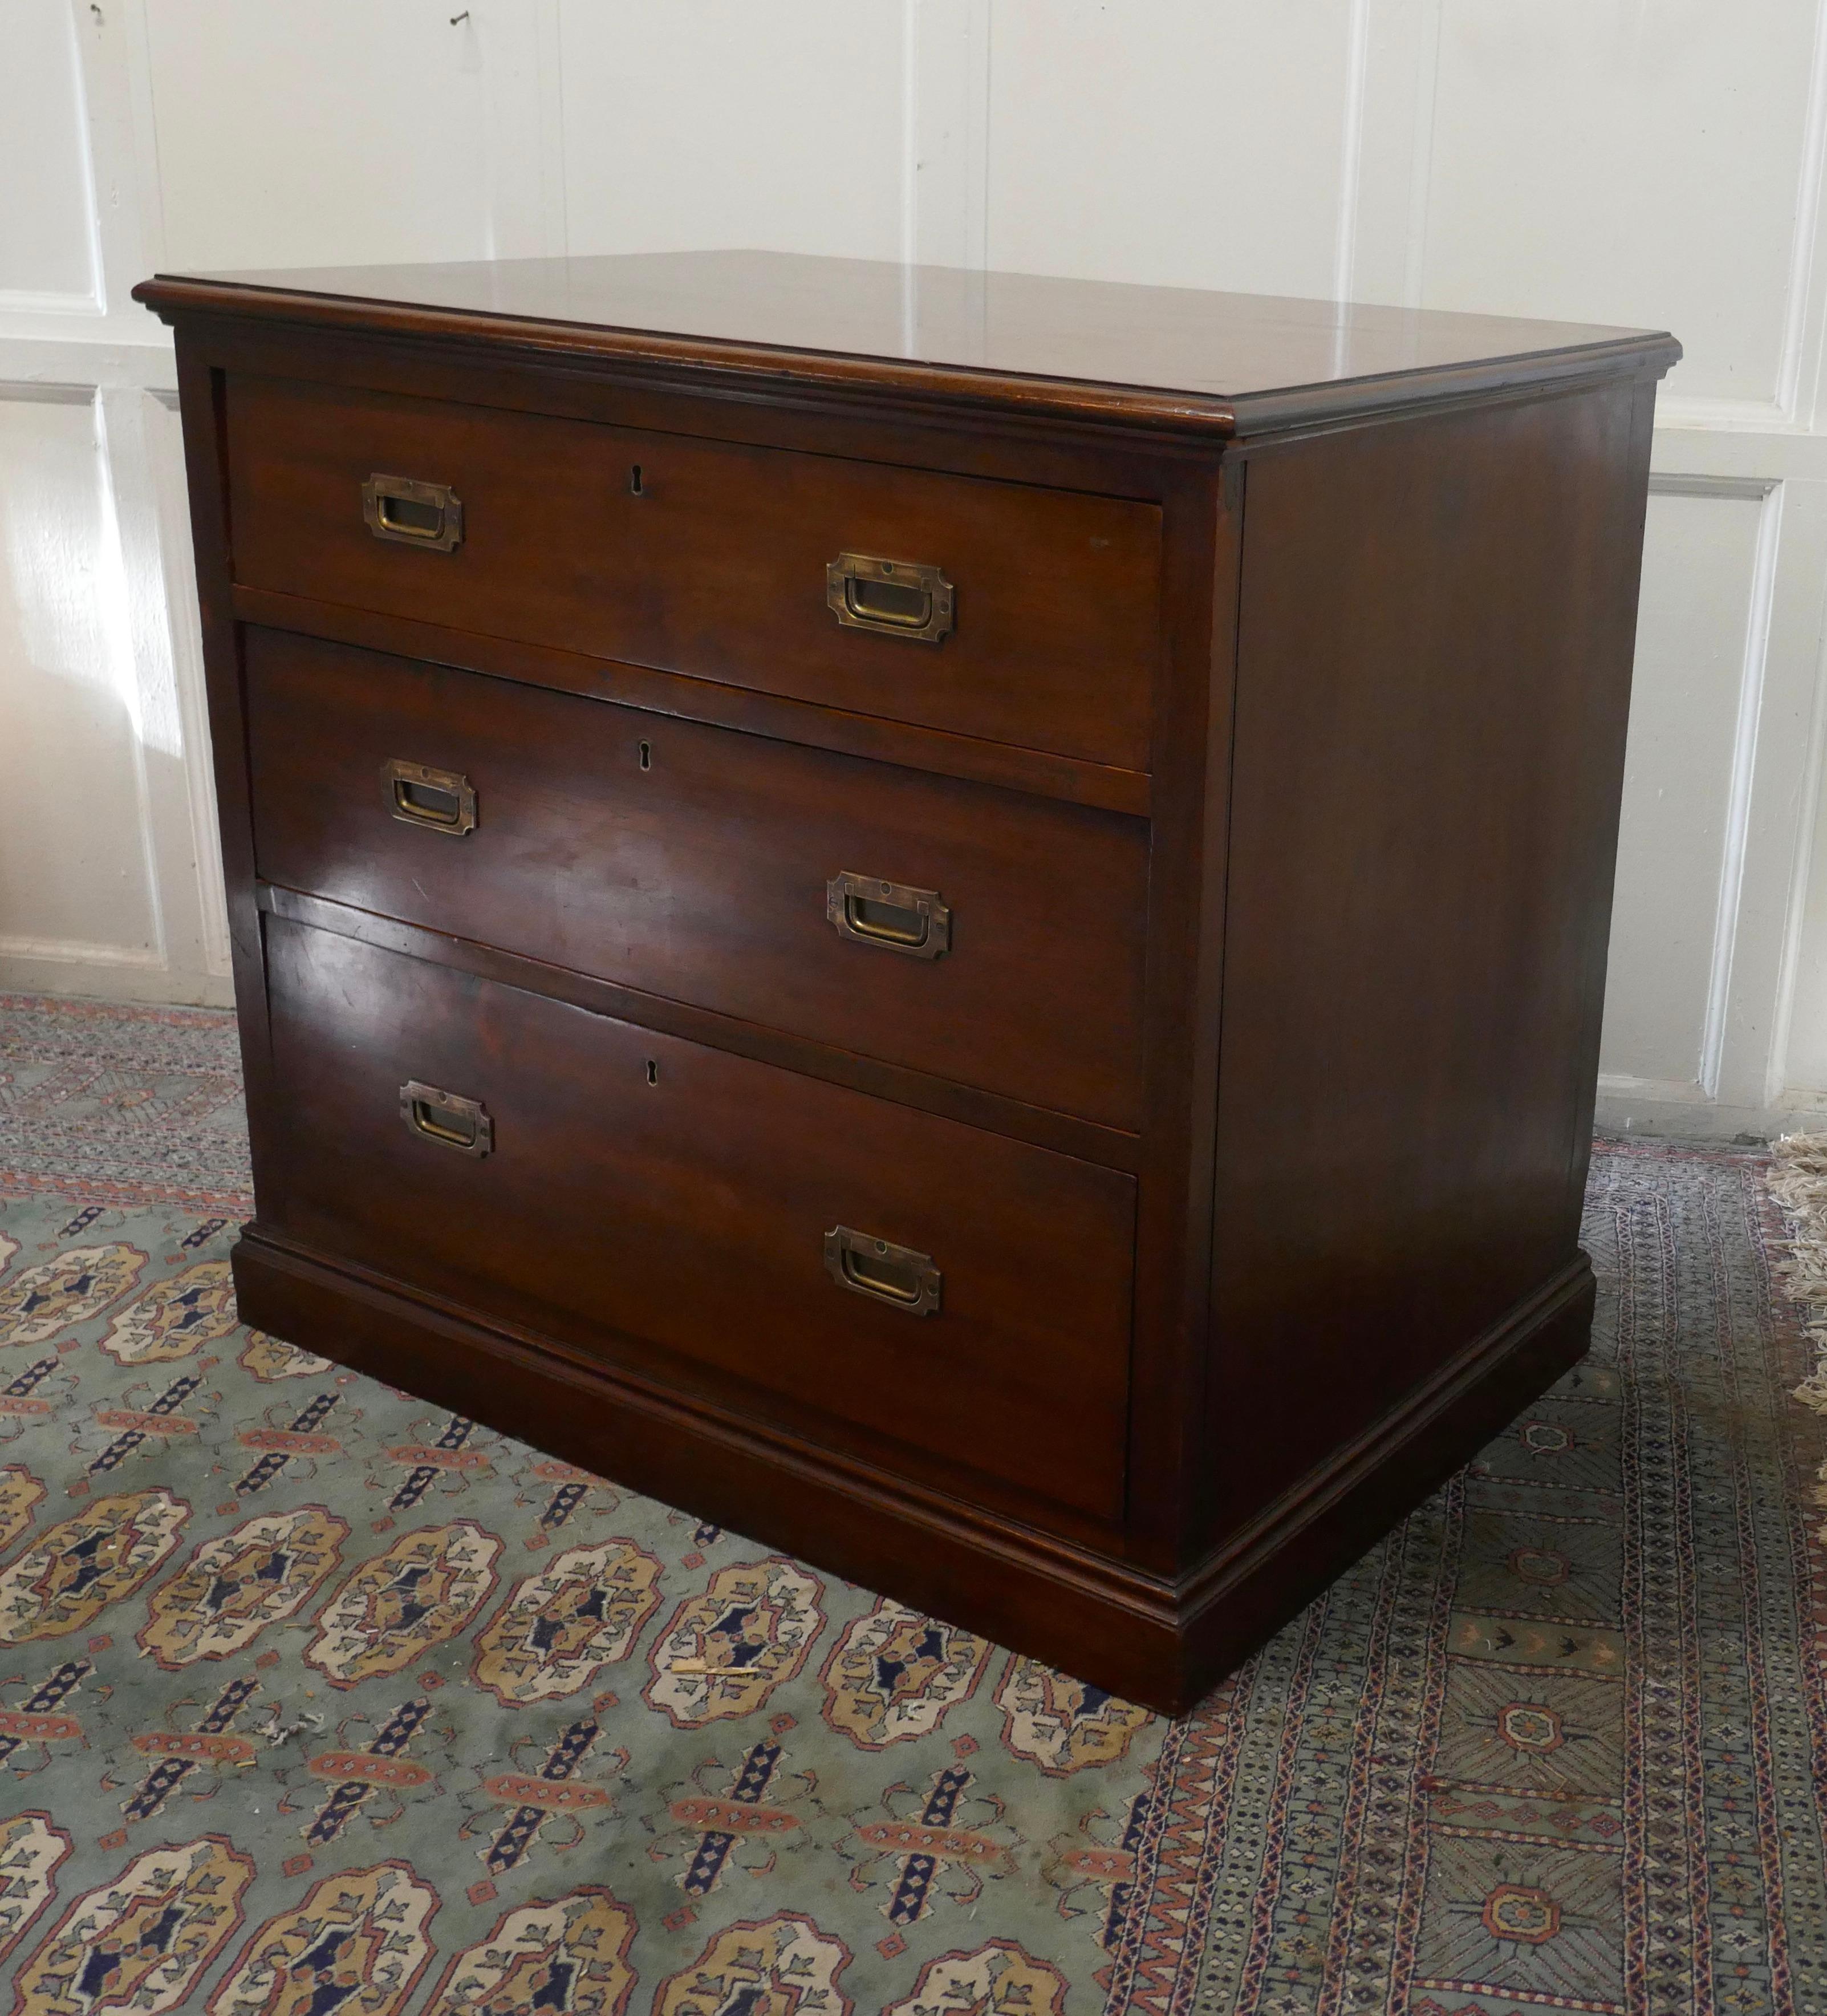 Good Quality 3 Drawer Mahogany campaign chest, from HMS Renown

This is a delightful and interesting piece, it is made in Mahogany, a Campaign Chest with inset brass handles and 3 deep drawers.
On the underside of one of the drawers the ships